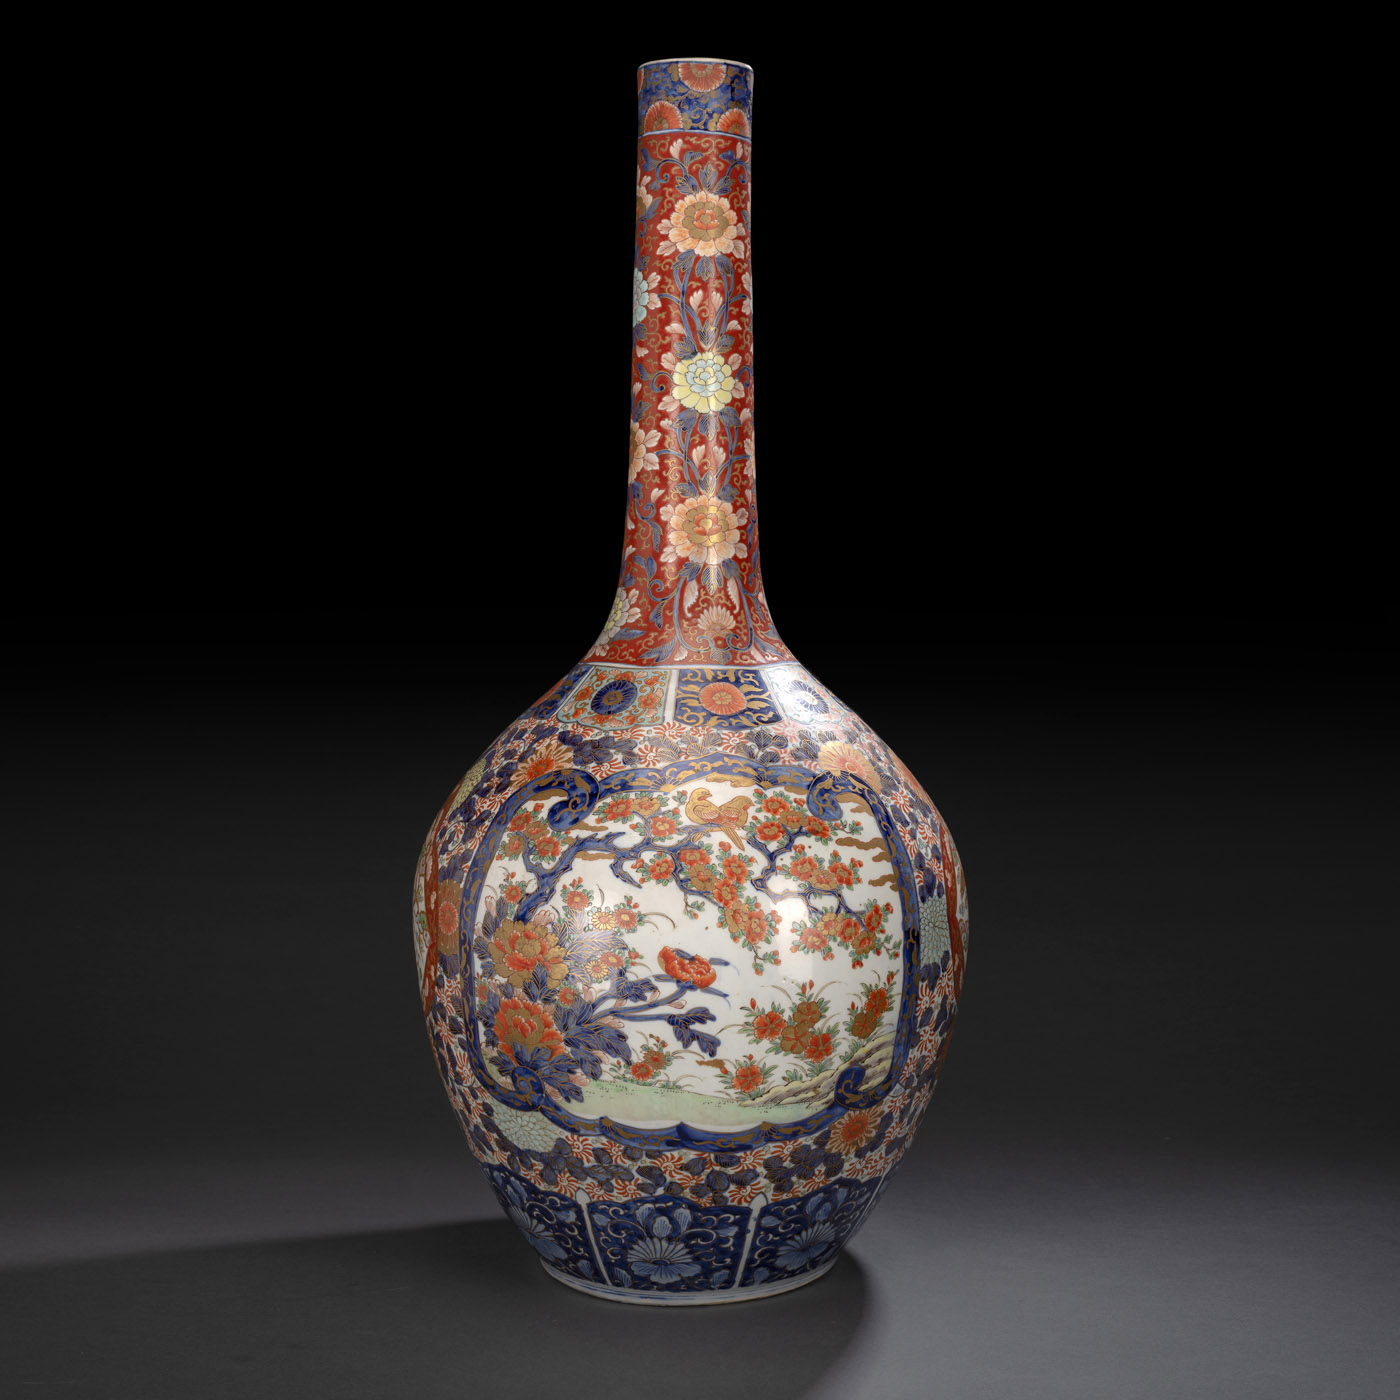 <b>A LARGE NARROW-NECKED IMARI PORCELAIN VASE DECORATED WITH BIRDS AND FLOWERS</b>